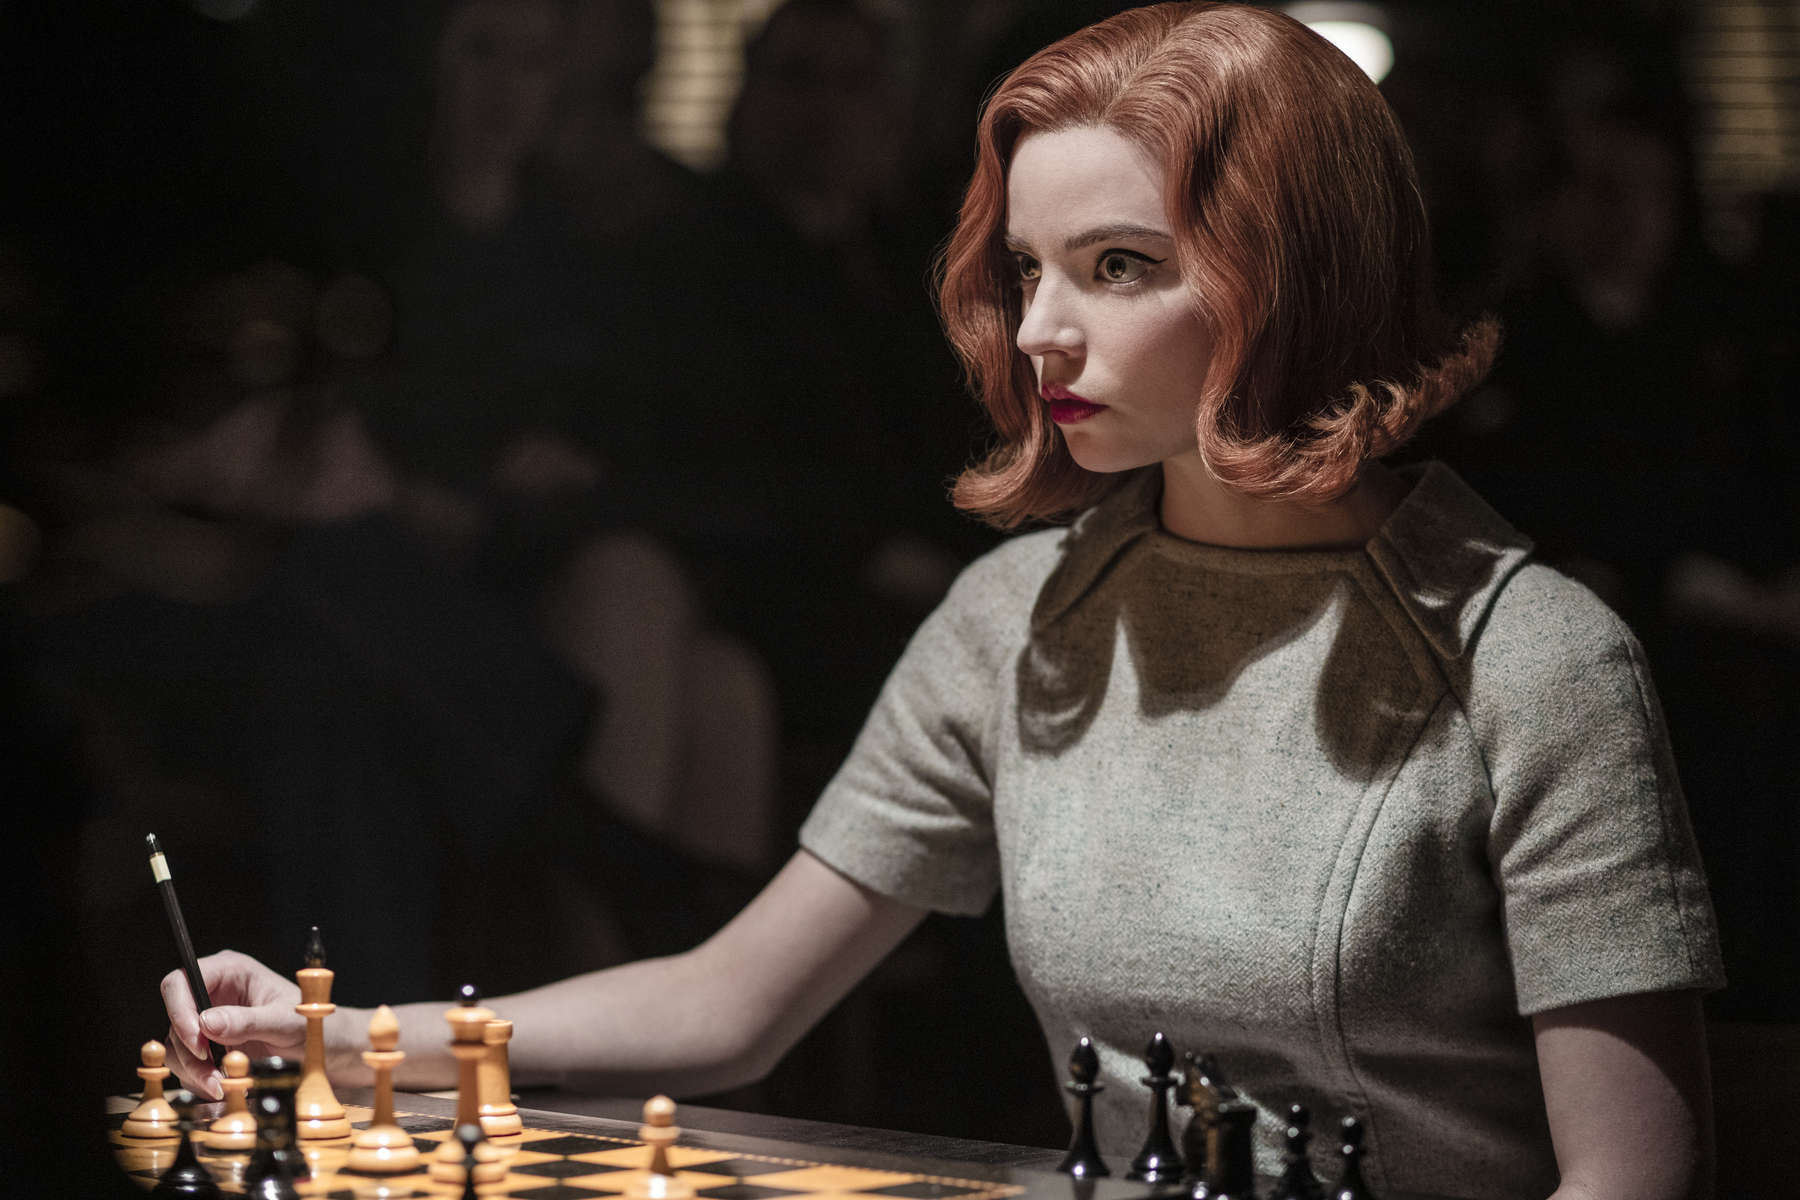 A woman sits at a chess table in this image from Wonderful Films.